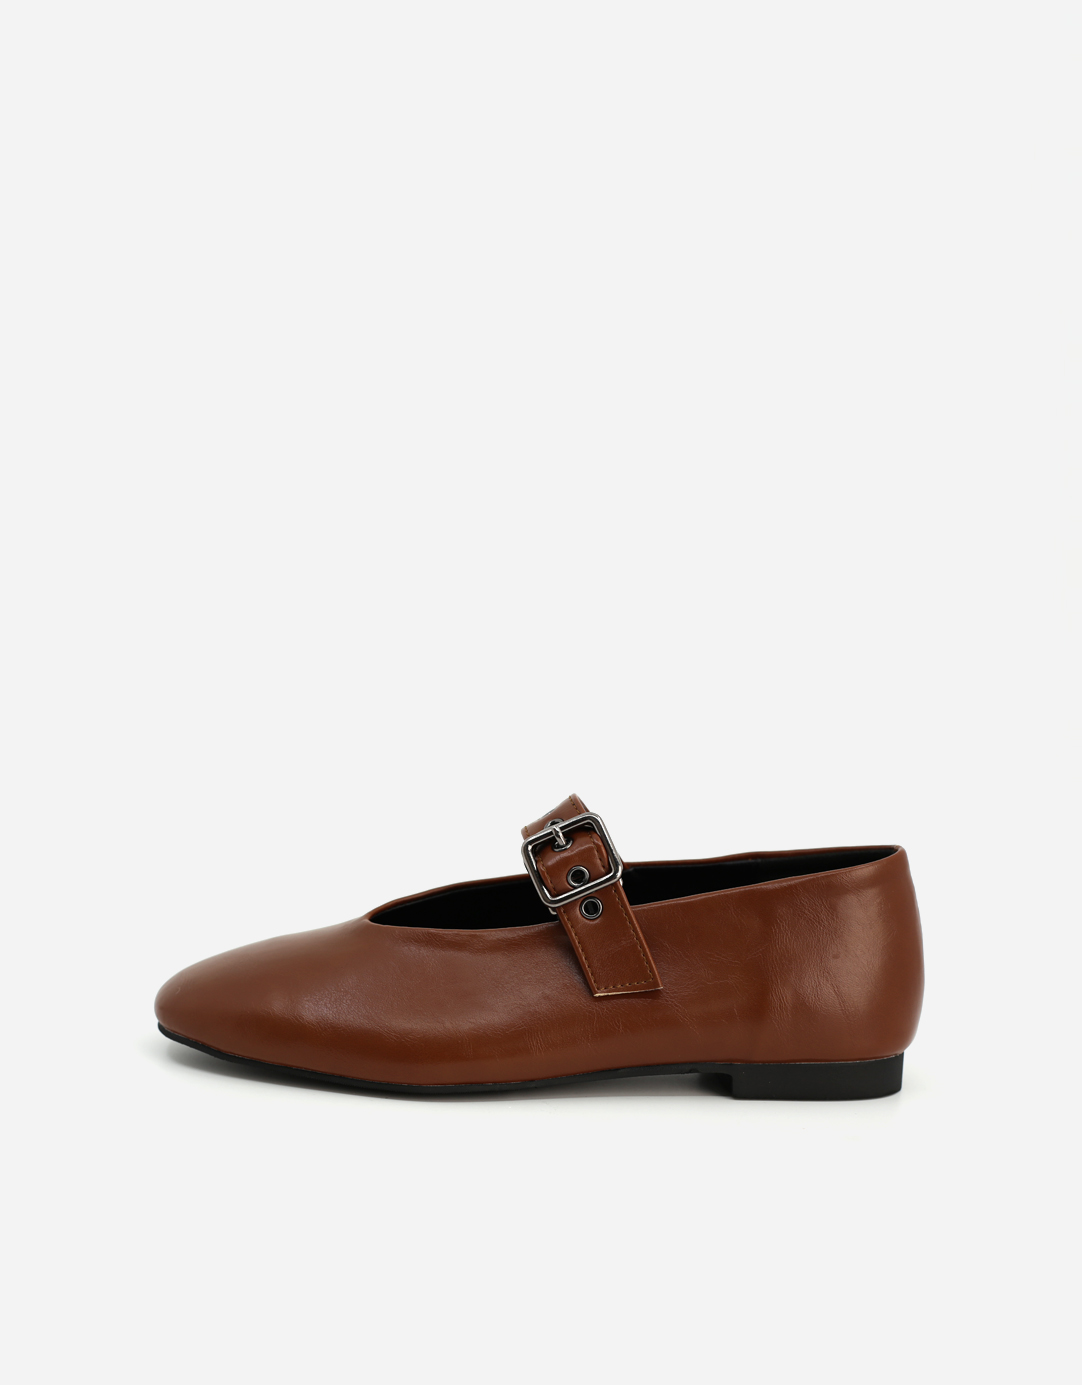 BROWN MARY JANE FLAT LOAFER